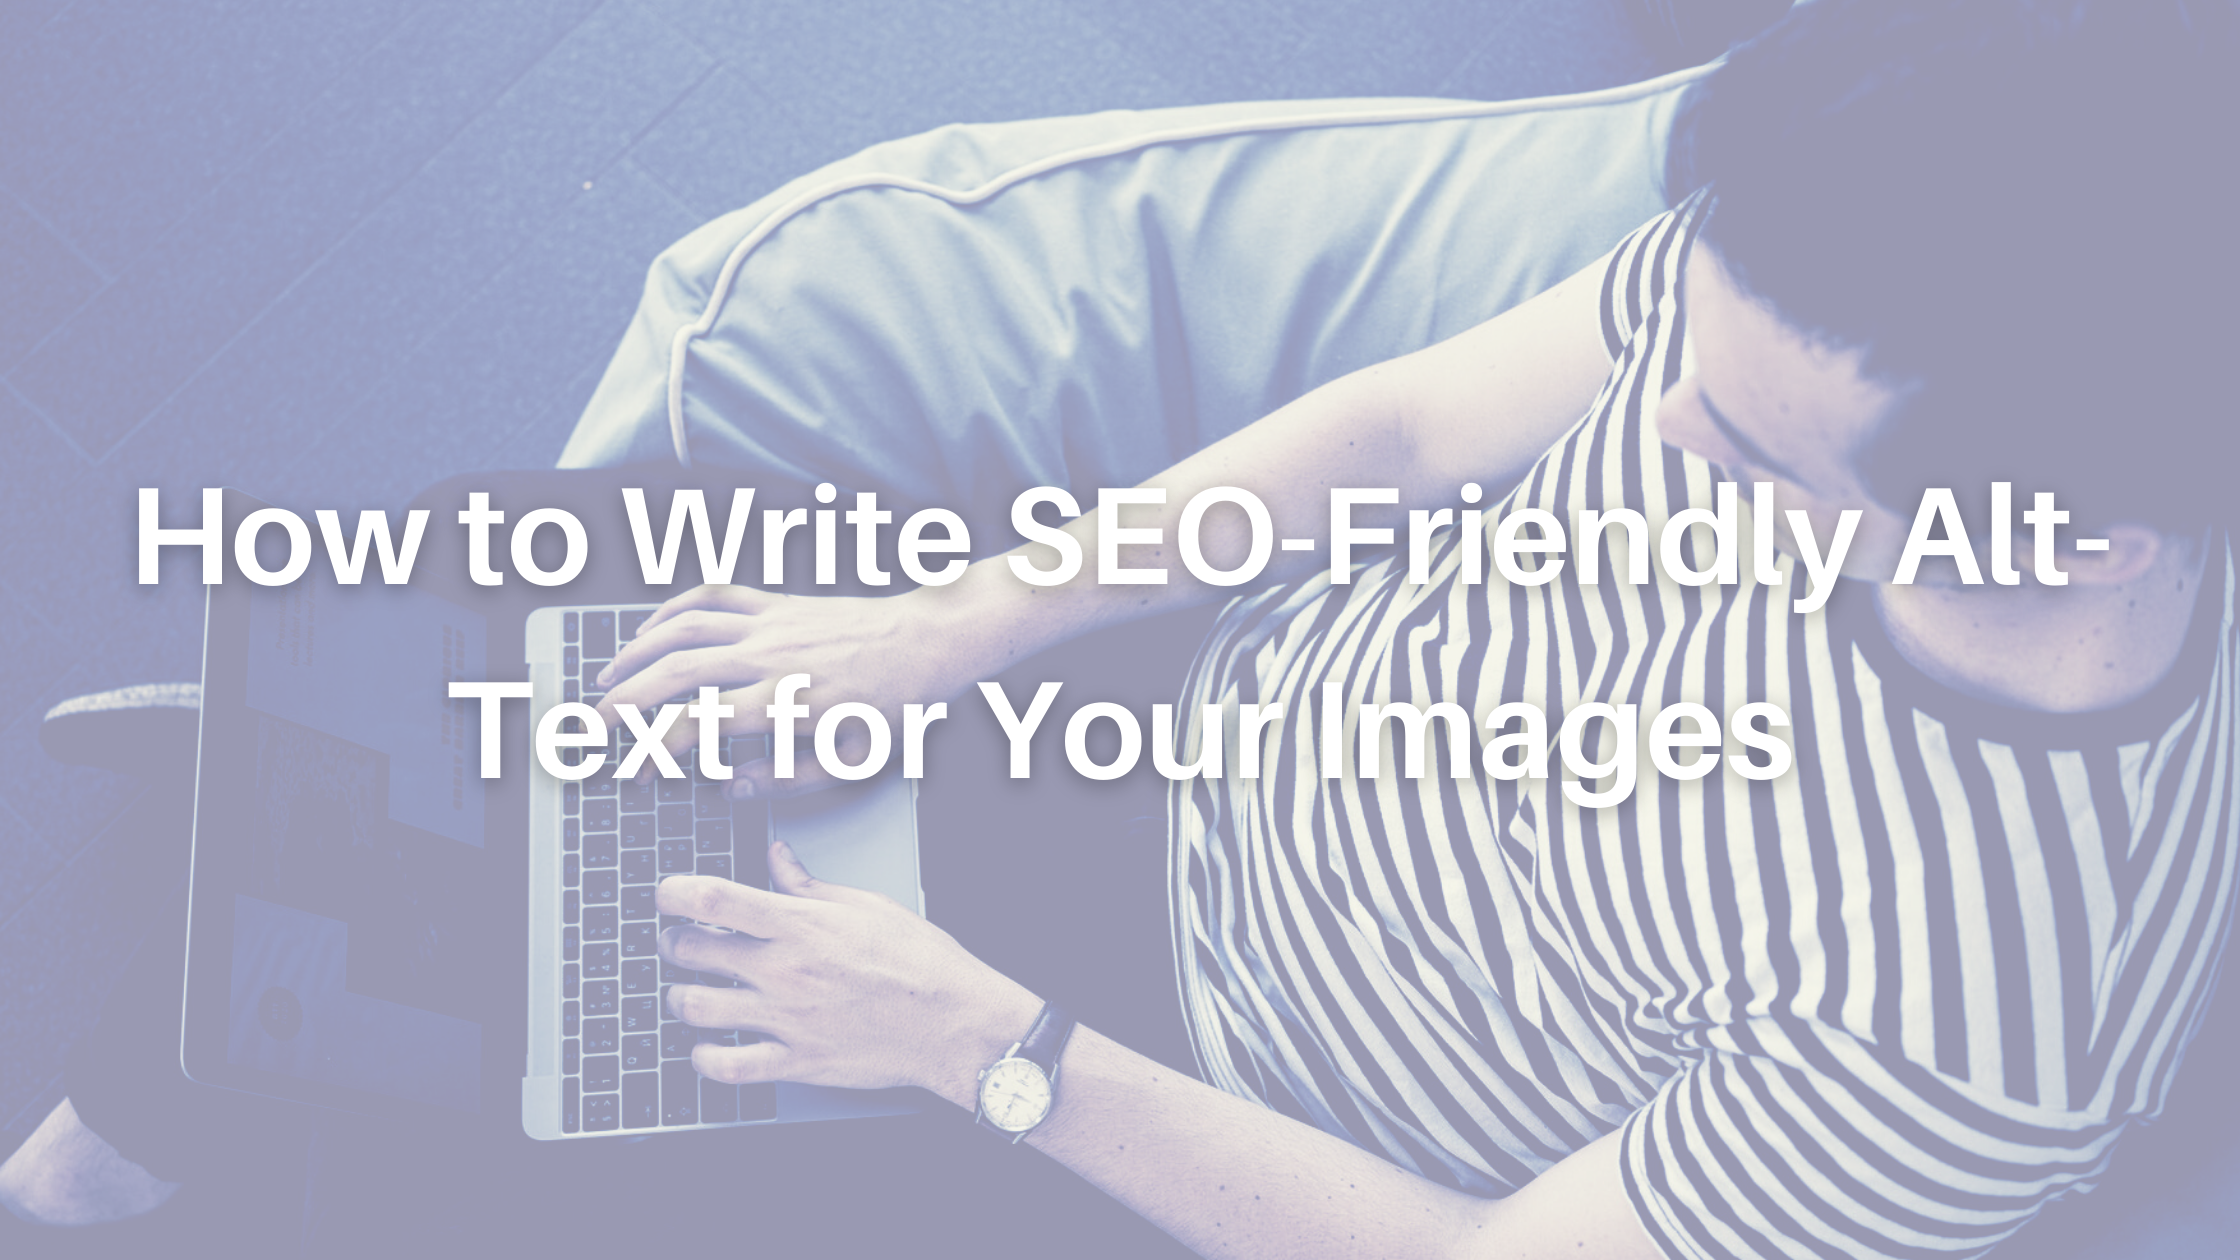 how to write seo-friendly alt-text for your images